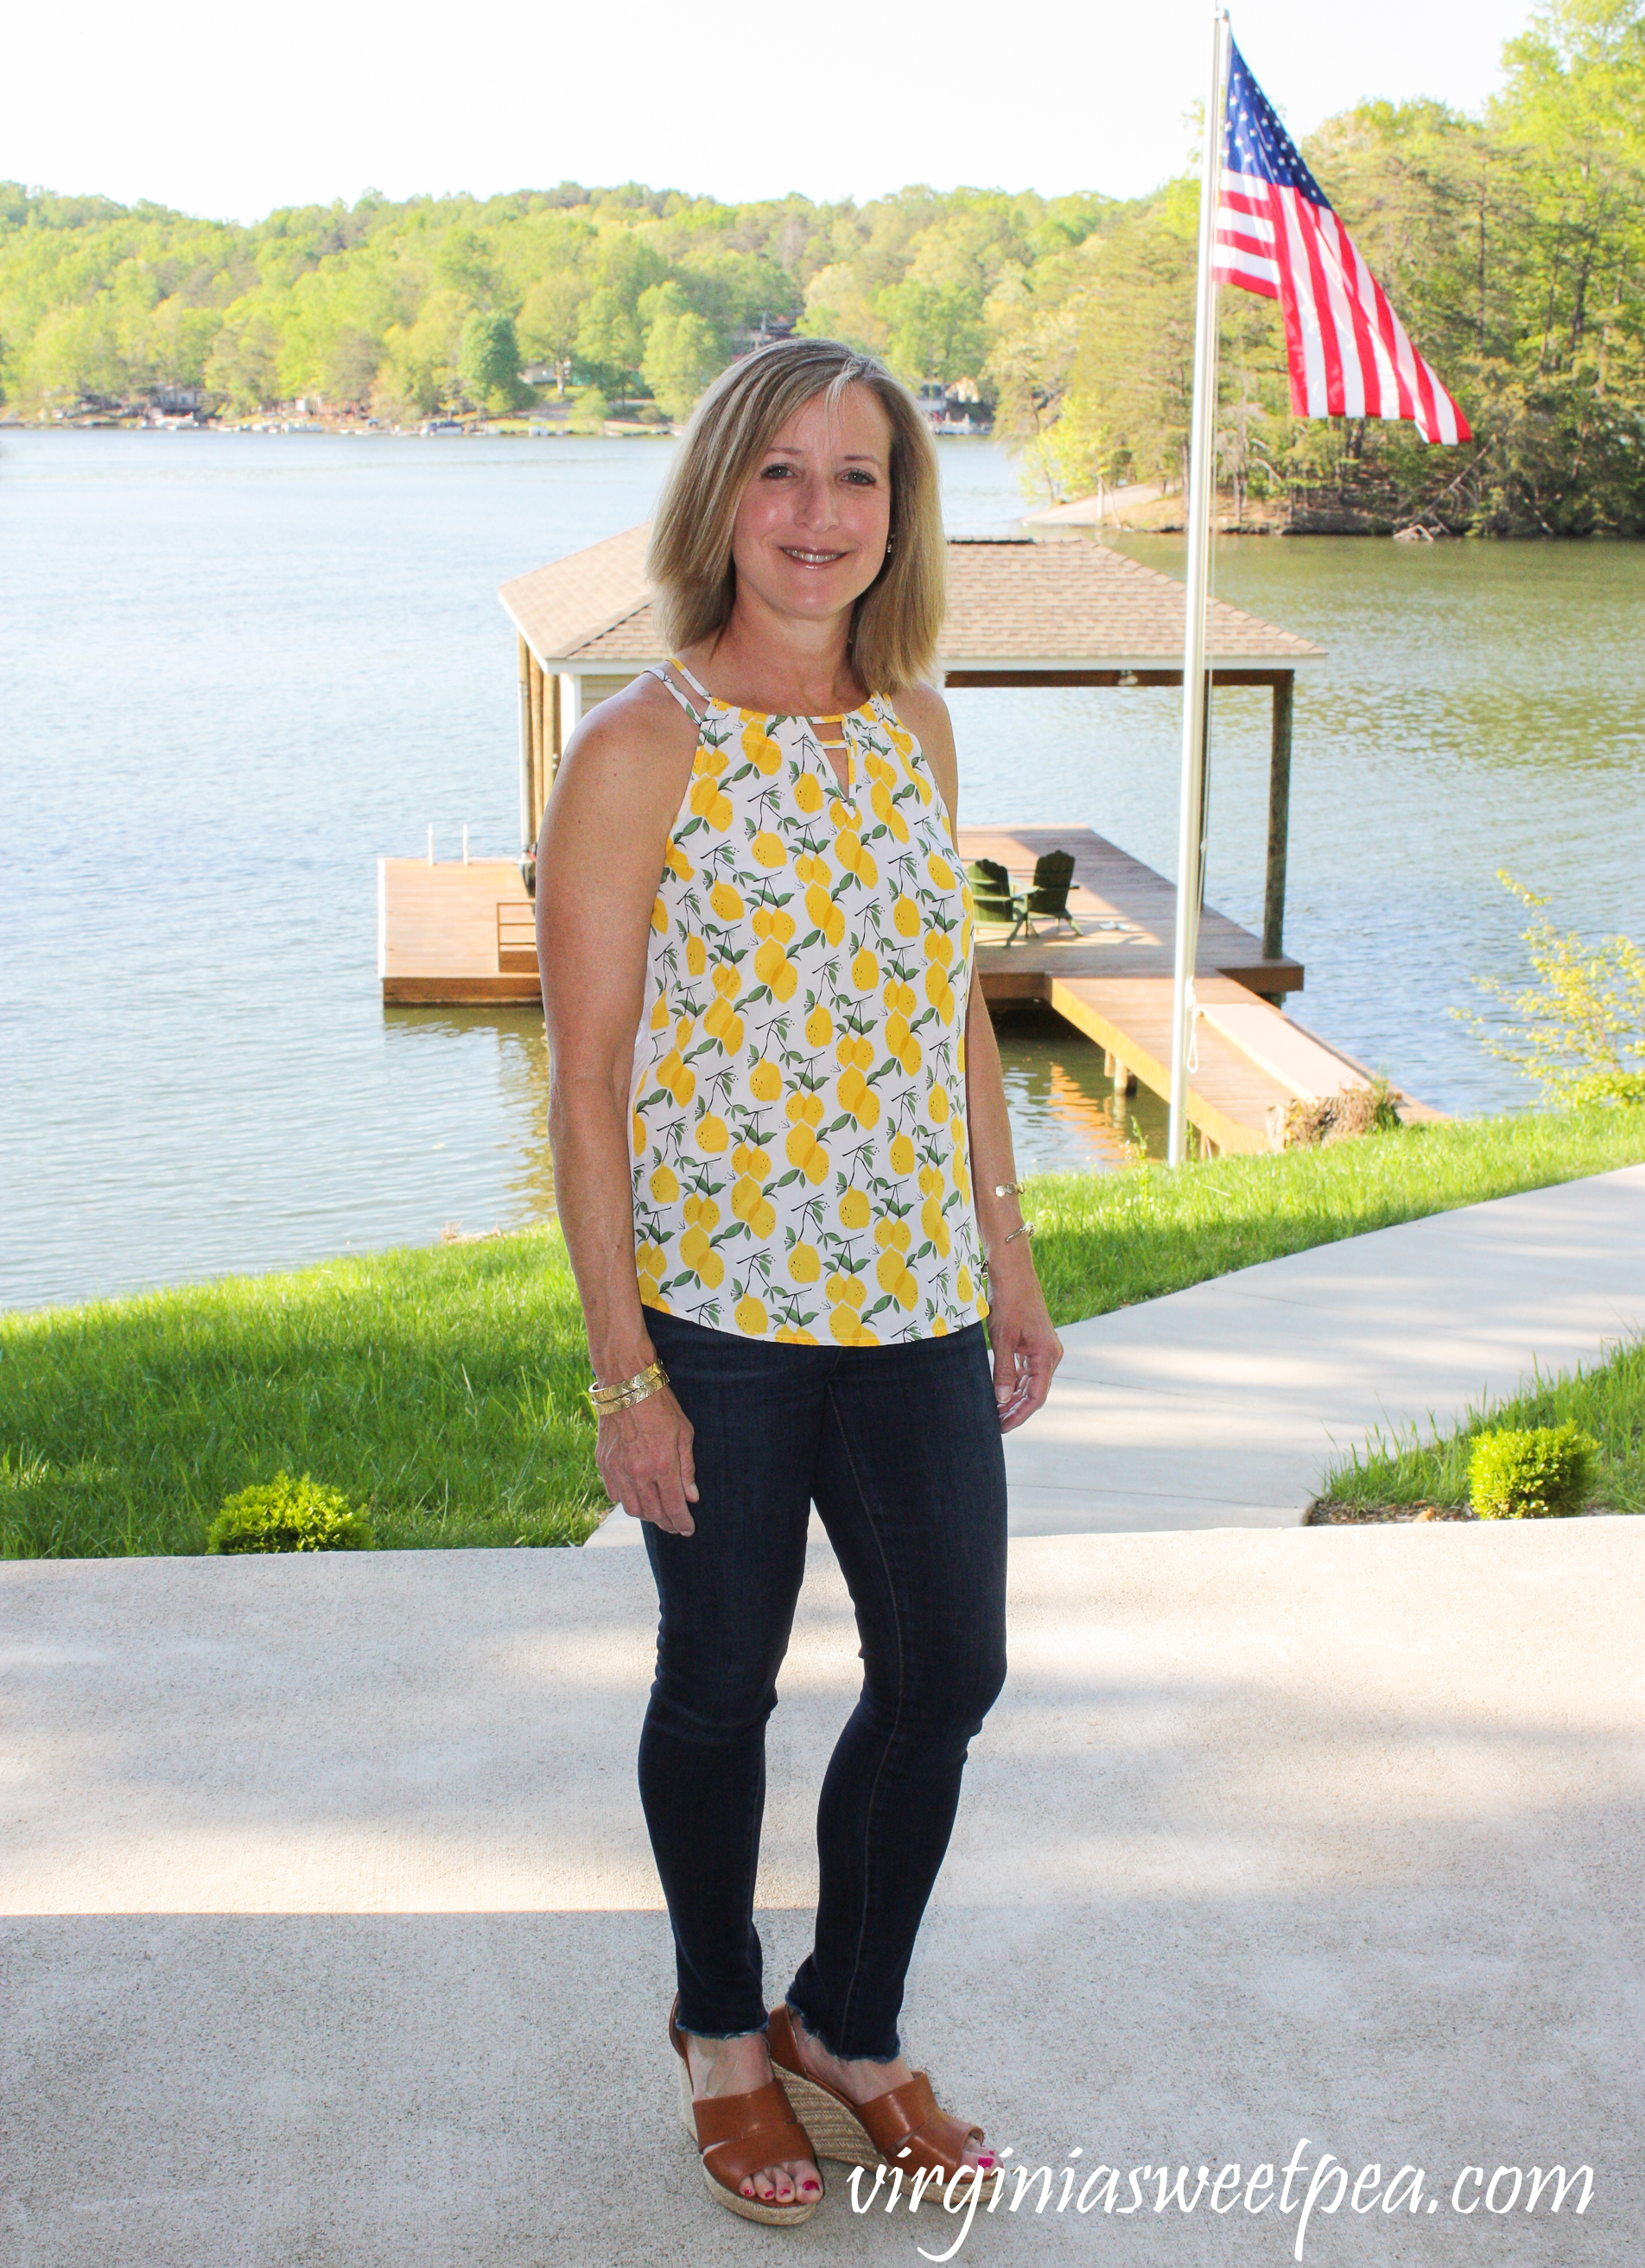 Stitch Fix Review for May 2019 - Market & Spruce Mixed Media Halter Top #stitchfix #stitchfixreview #stitchfixsummer